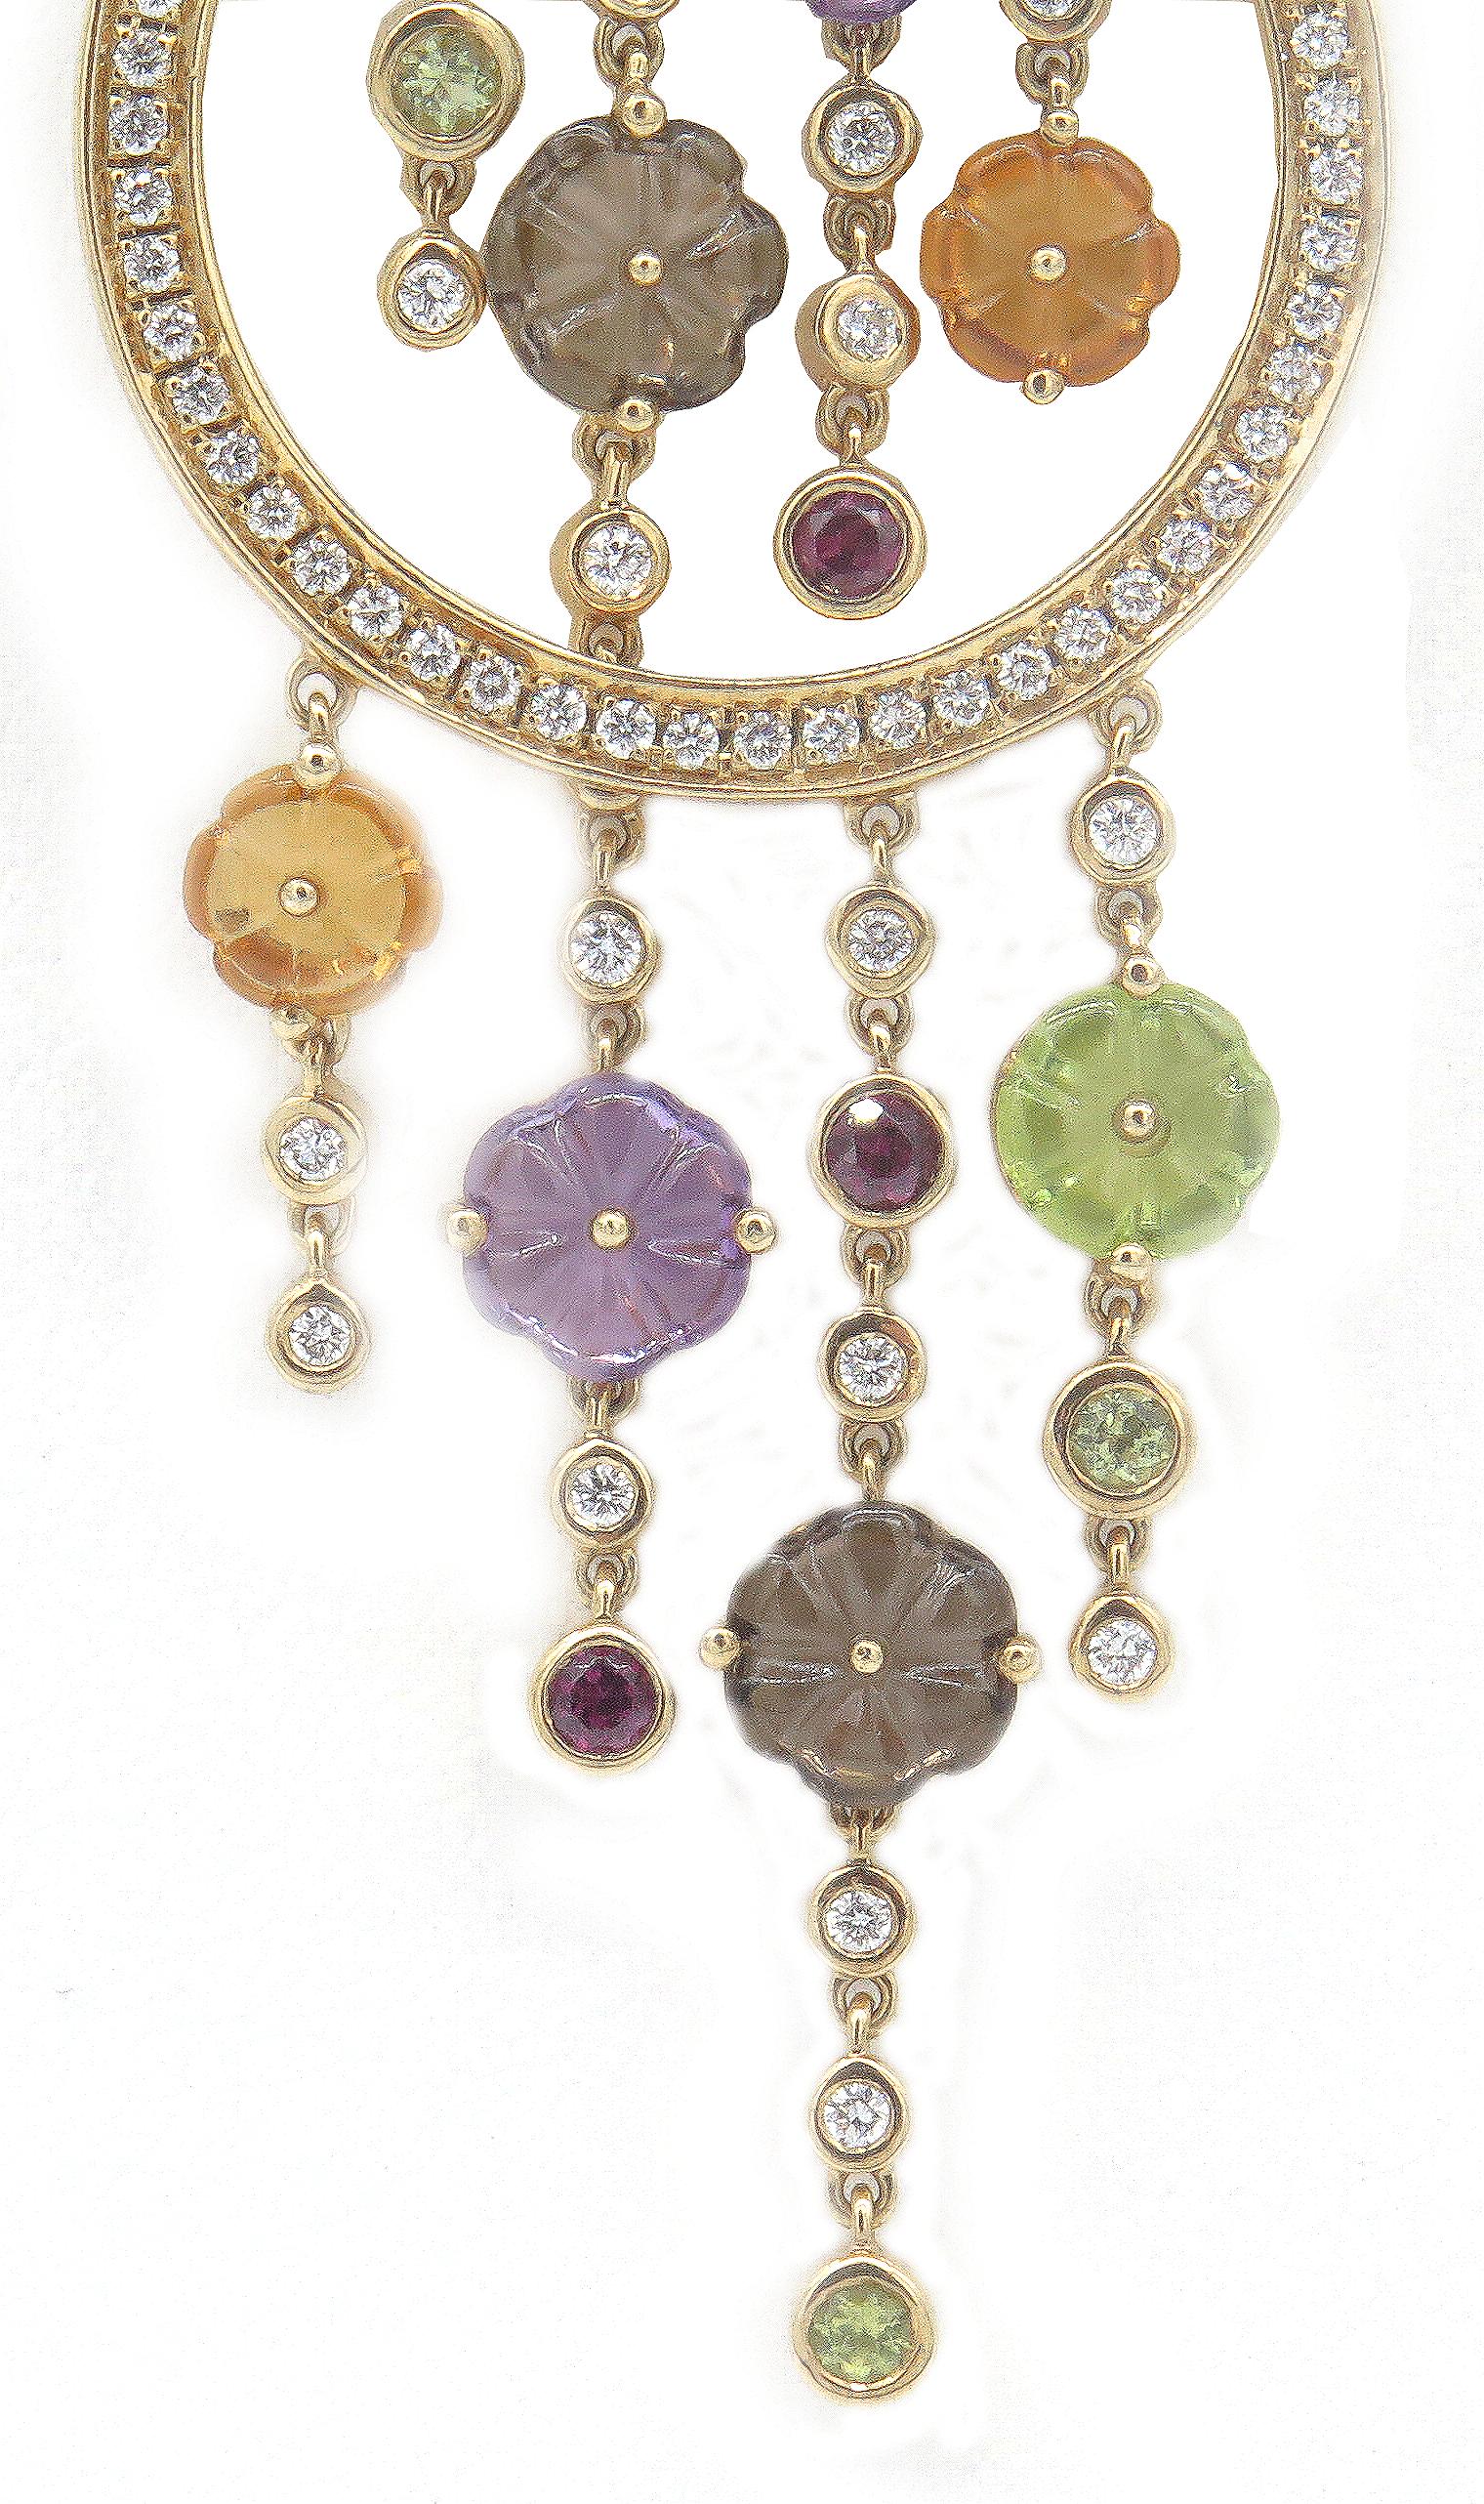 Made in Italy, this beautiful and colorful Di Modolo necklace pendant is from the Tempia Collection. This 18K yellow gold pendant features a combination of precious and semi-precious stones that come together to create this intricate design. Tiny